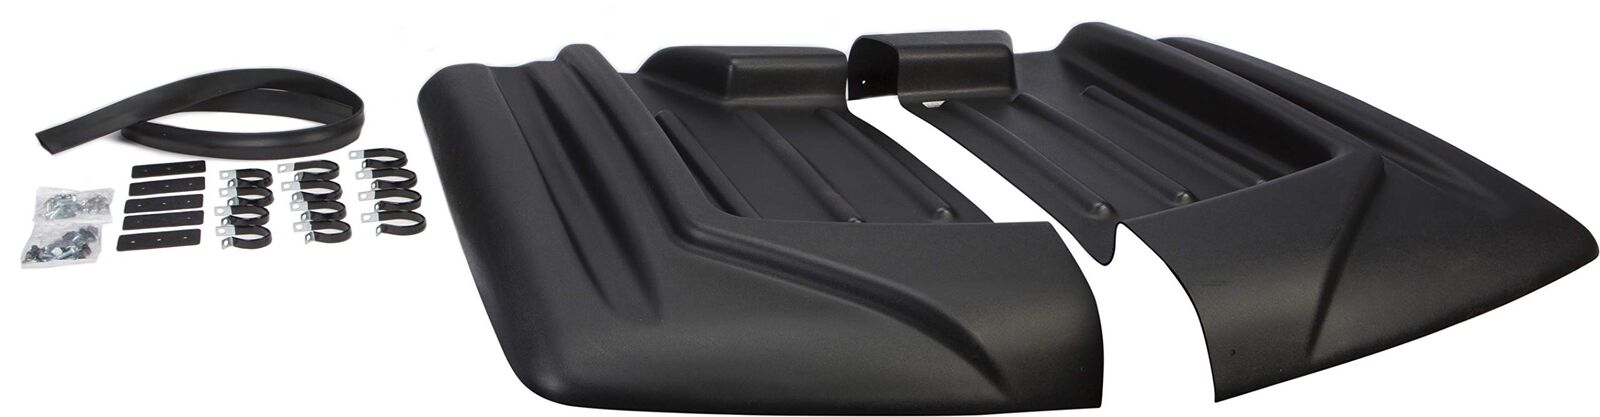 Open Trail Poly Molded Hdpe Hard Top Roof Black Fits Kawasaki Mule 600 610 Sx 05-19 V000156-11056T